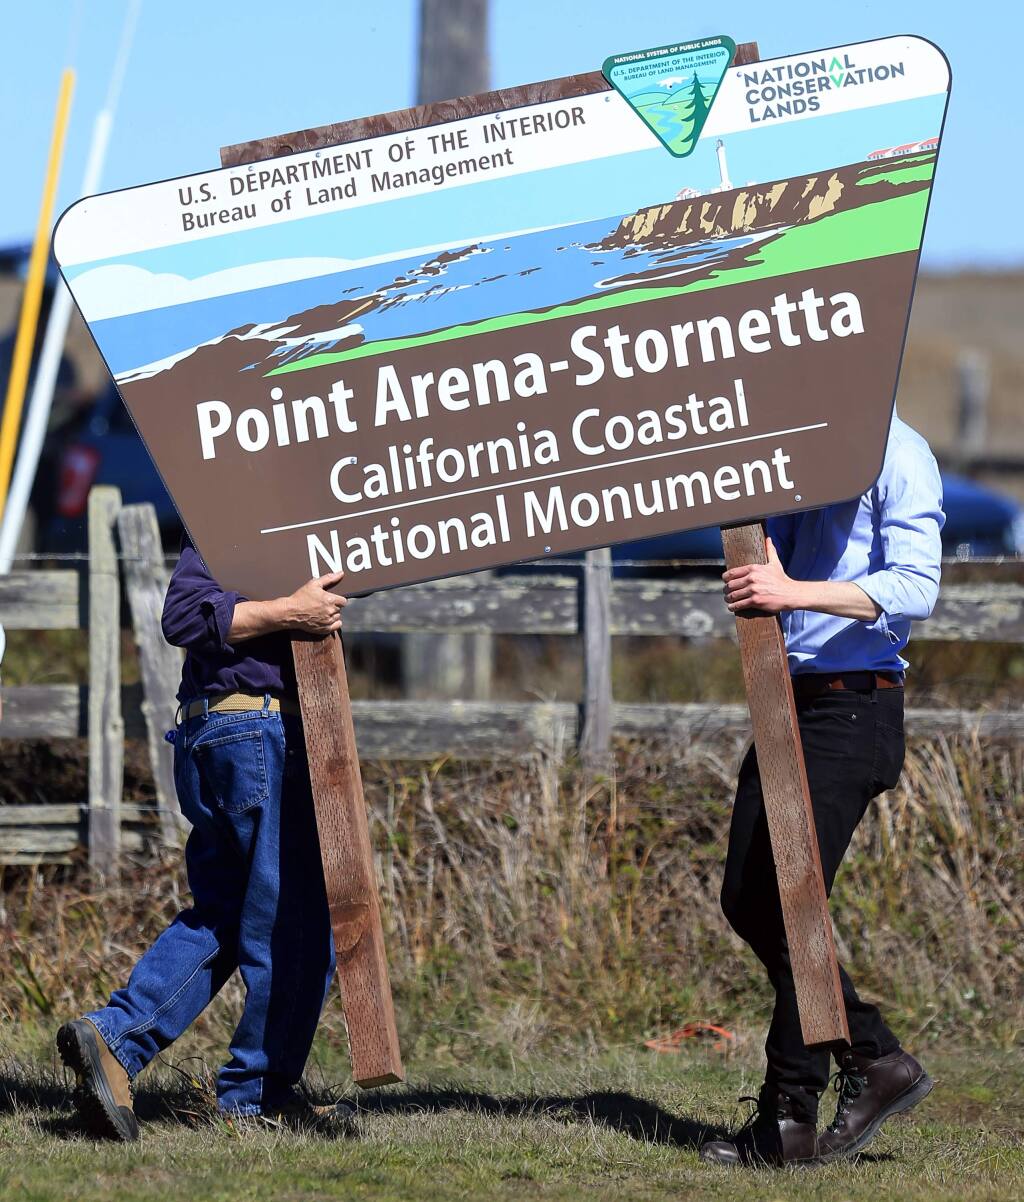 U.S. Interior Secretary Sally Jewell dedicated the Point Arena-Stornetta Public Lands as an official part of the 1,100-mile California Coastal National Monument in Point Arena, Wednesday March 12, 2014 in Mendocino County. (KENT PORTER/ PD FILE)